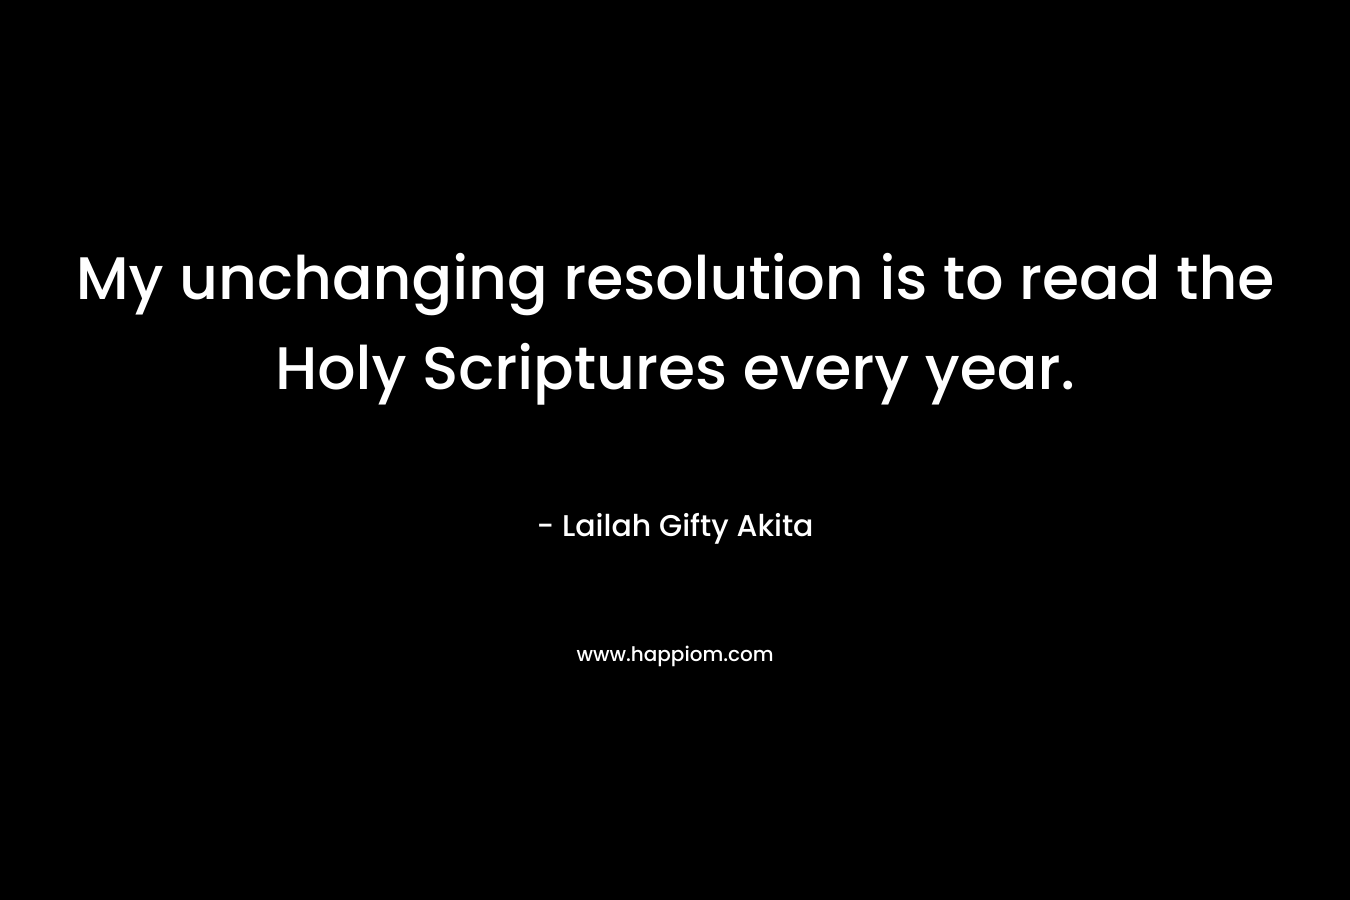 My unchanging resolution is to read the Holy Scriptures every year.